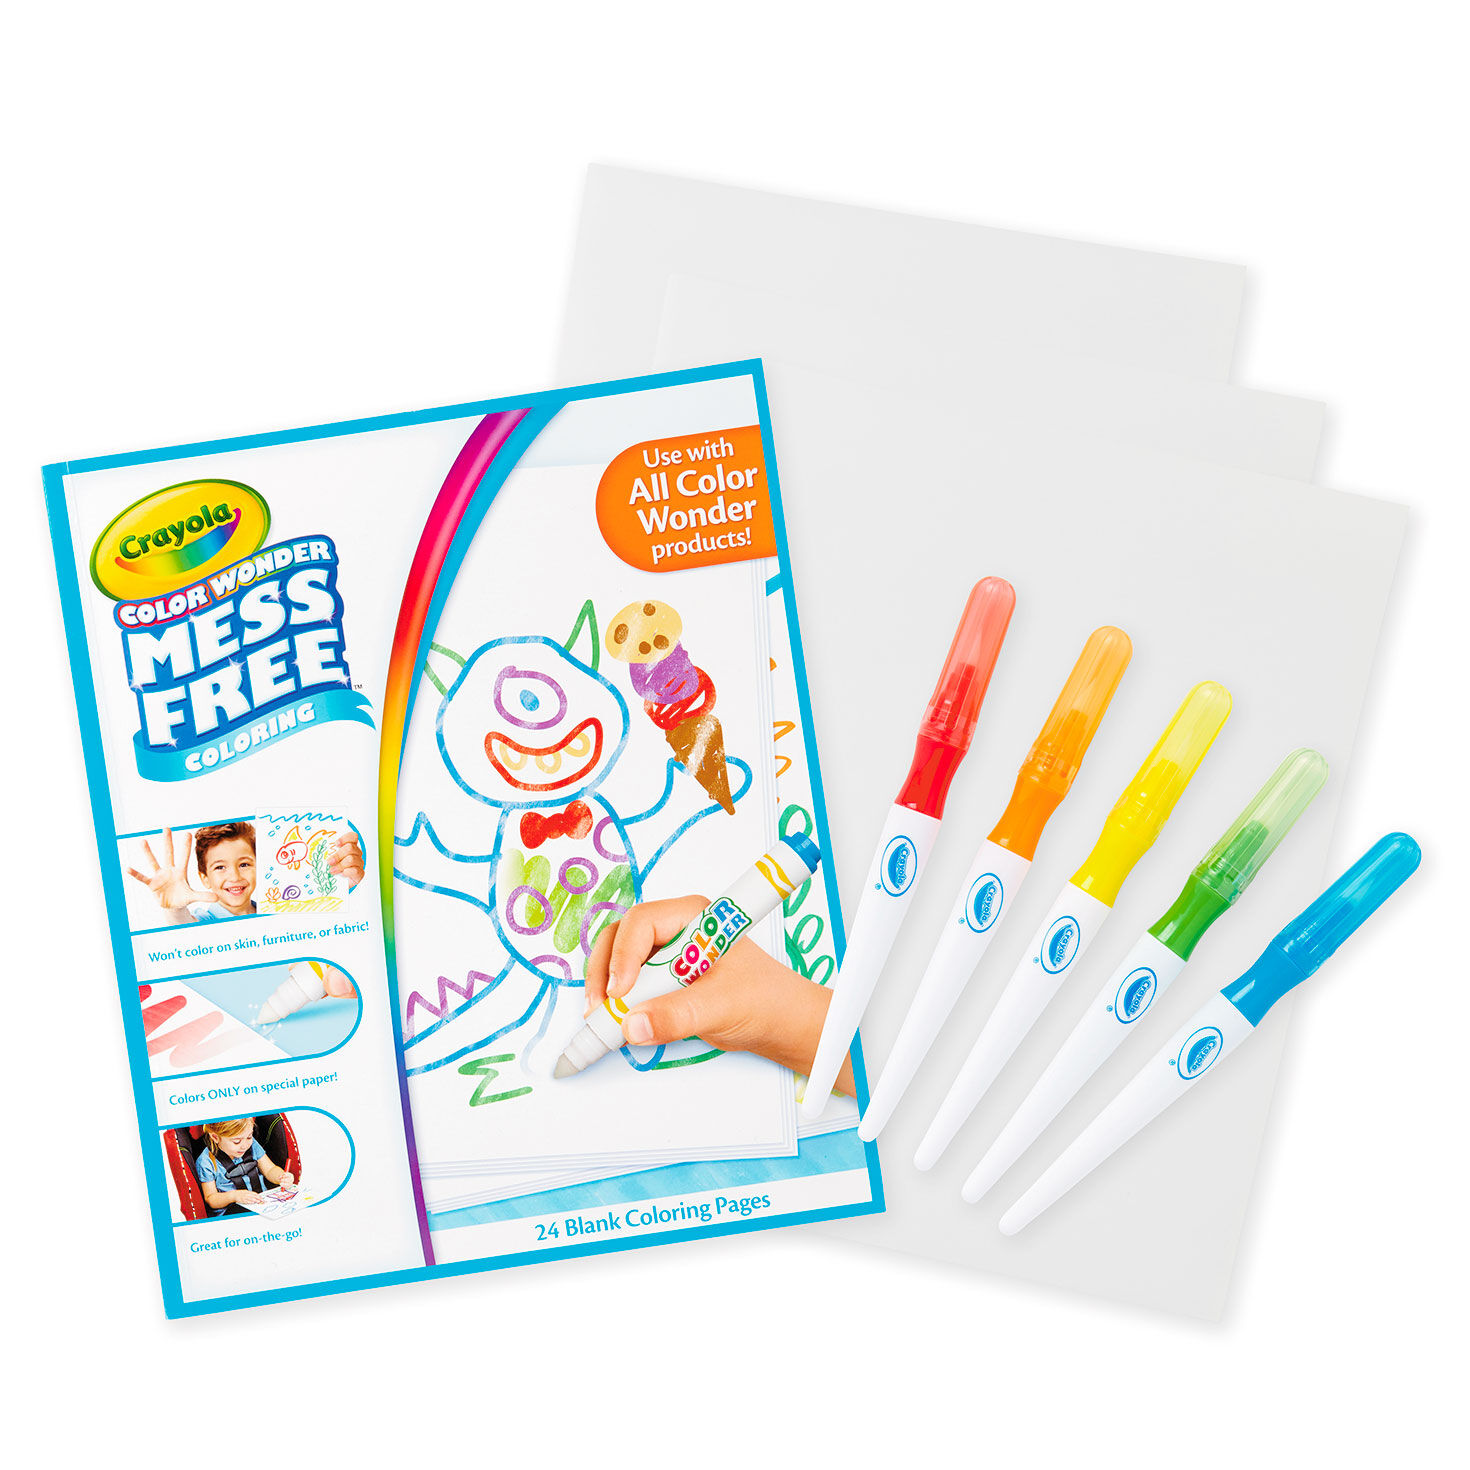 Crayola® Color Wonder Paintbrush Pens and Drawing Pad Set for only USD 12.99 | Hallmark